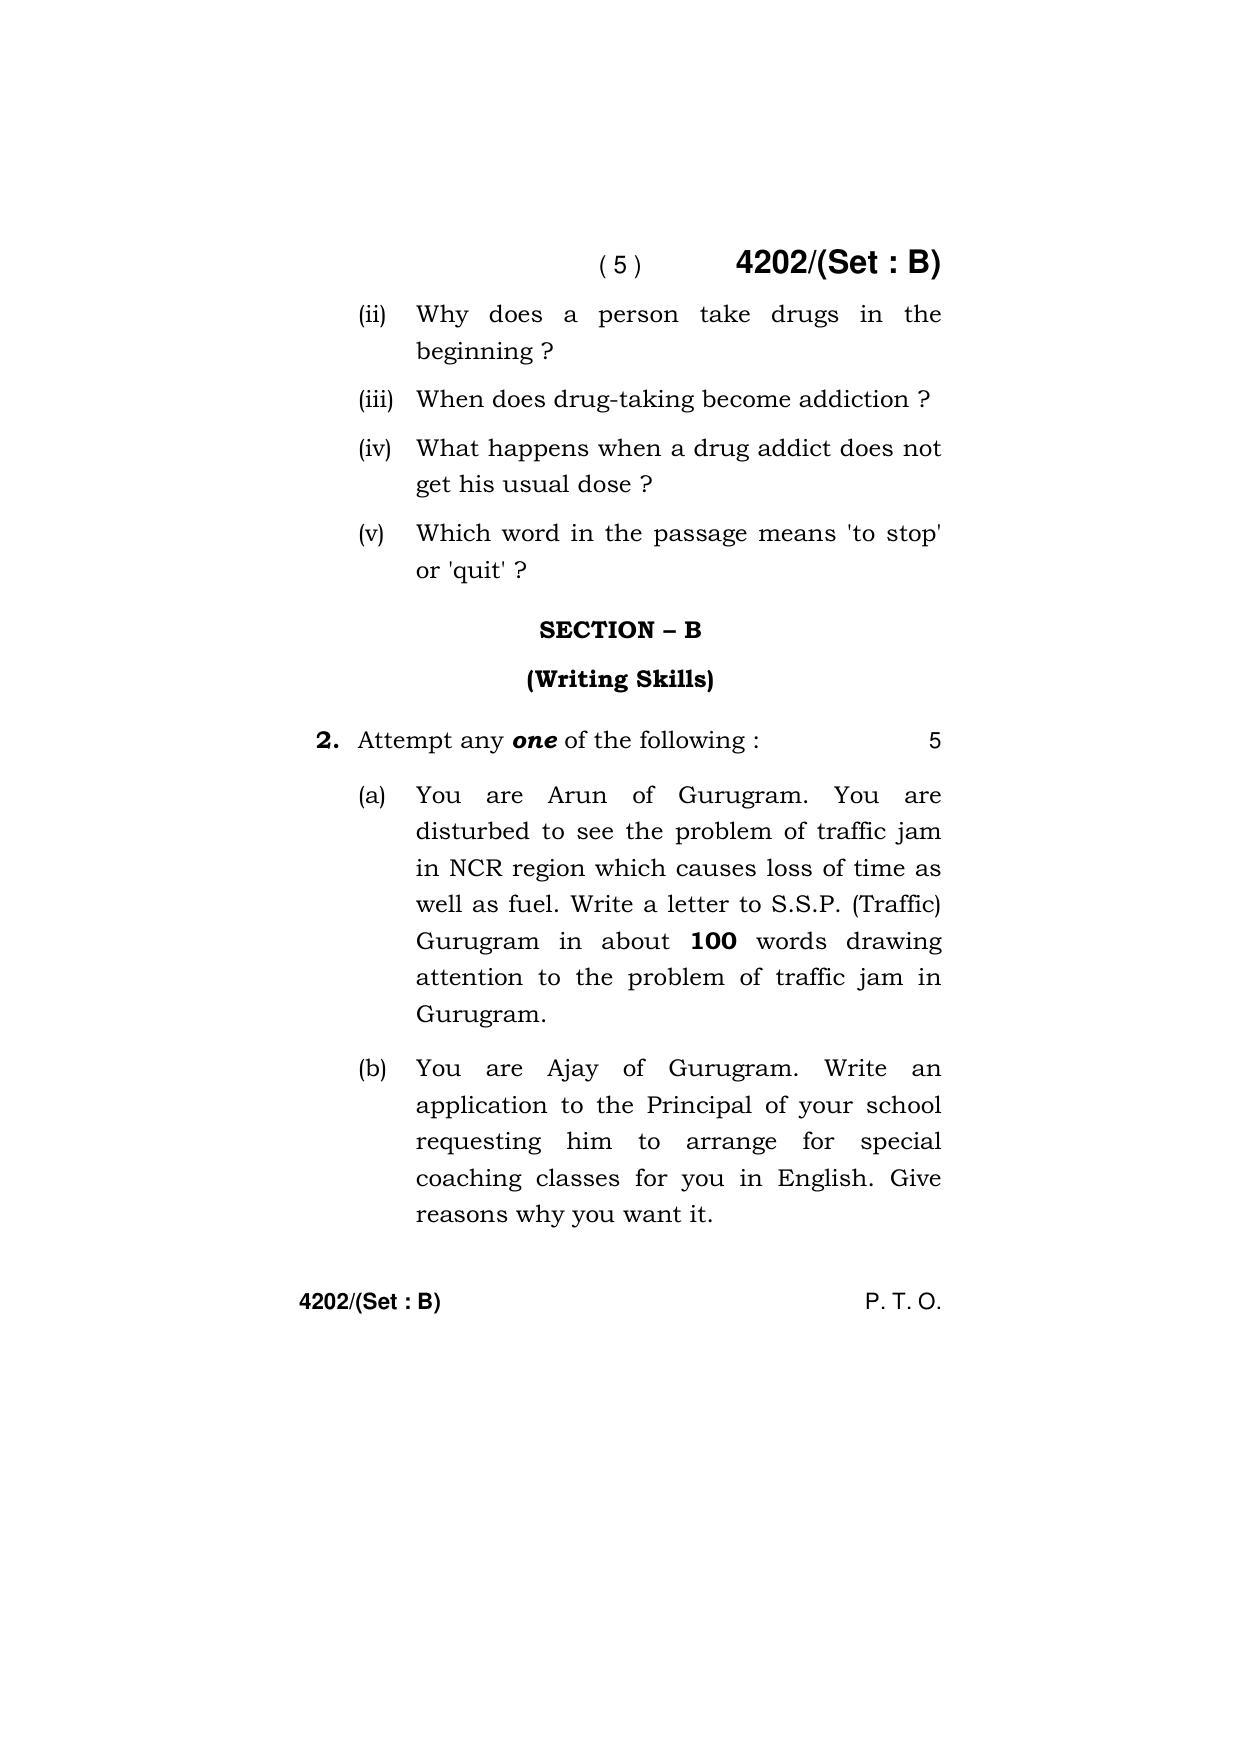 Haryana Board HBSE Class 10 English (All Set) 2019 Question Paper - Page 21